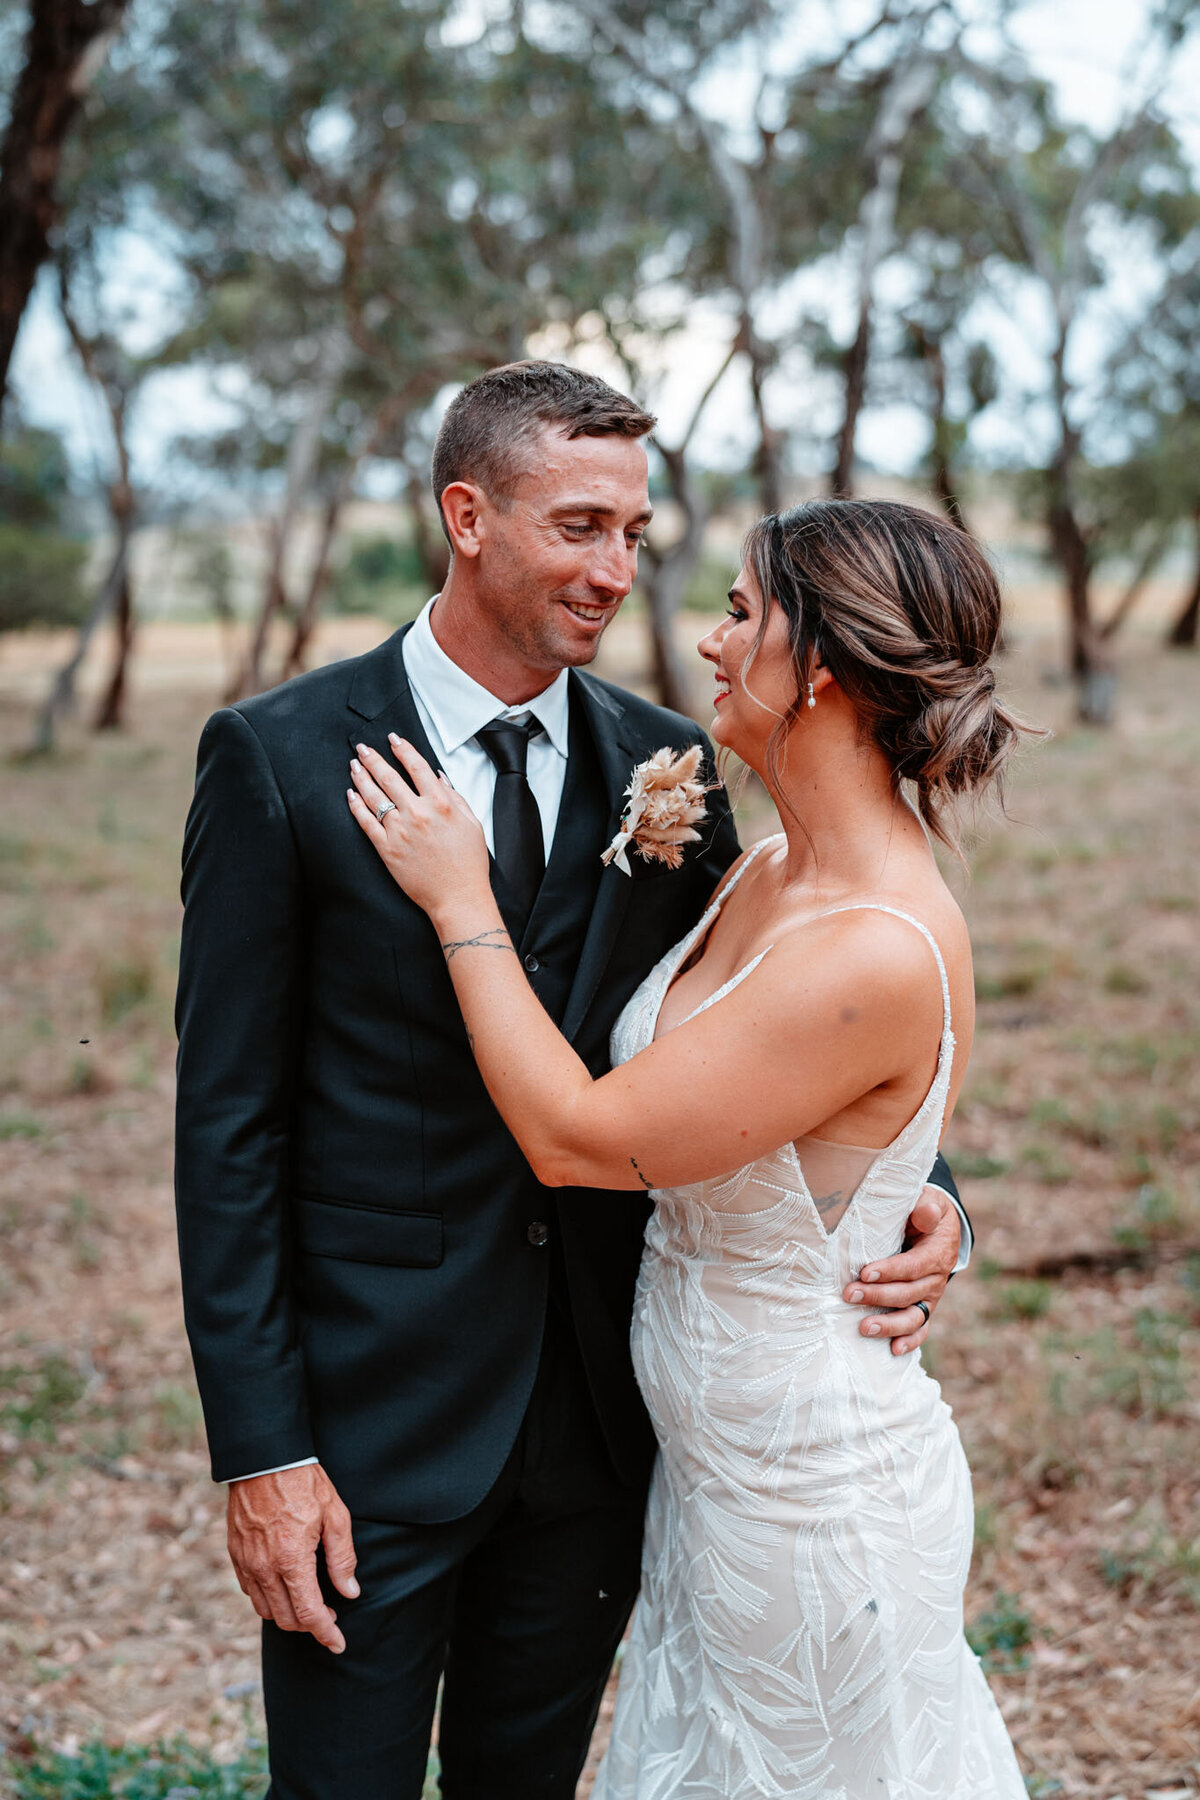 Mikaeley & Lachlan's after wedding photoshoot!